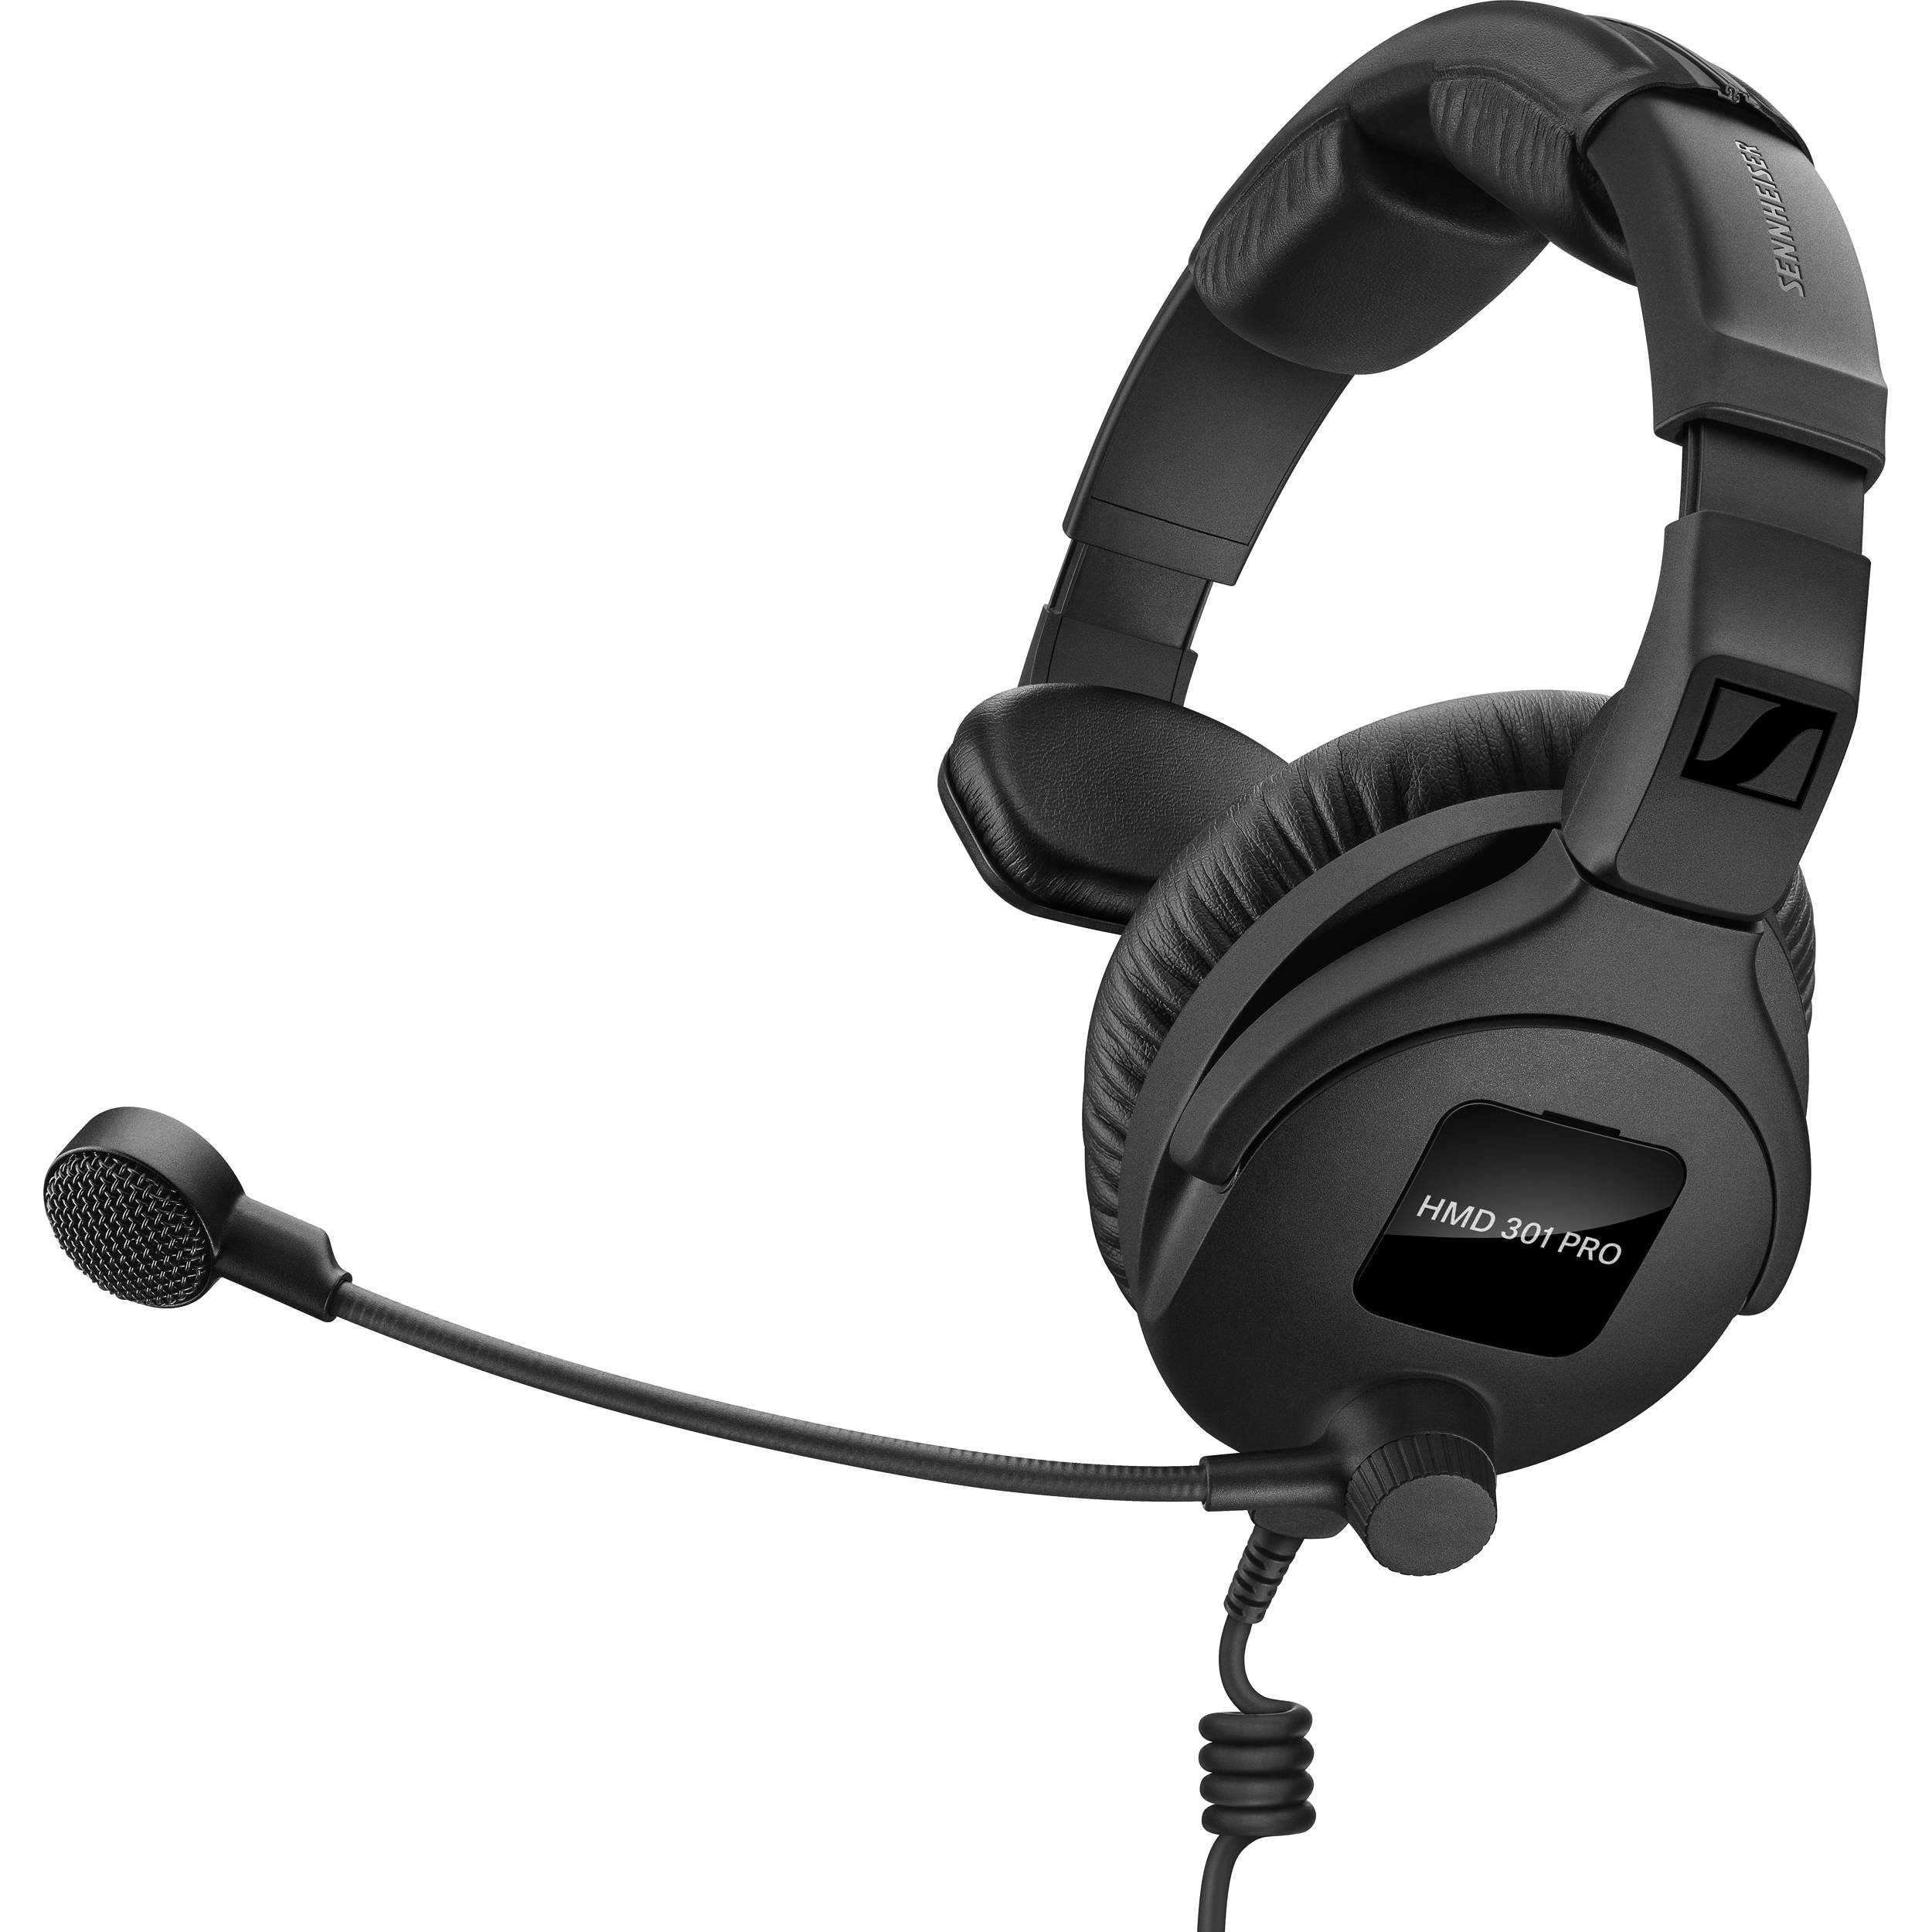 Sennheiser HMD 301 PRO Monaural Broadcast Headset Without Cable, Circumaural